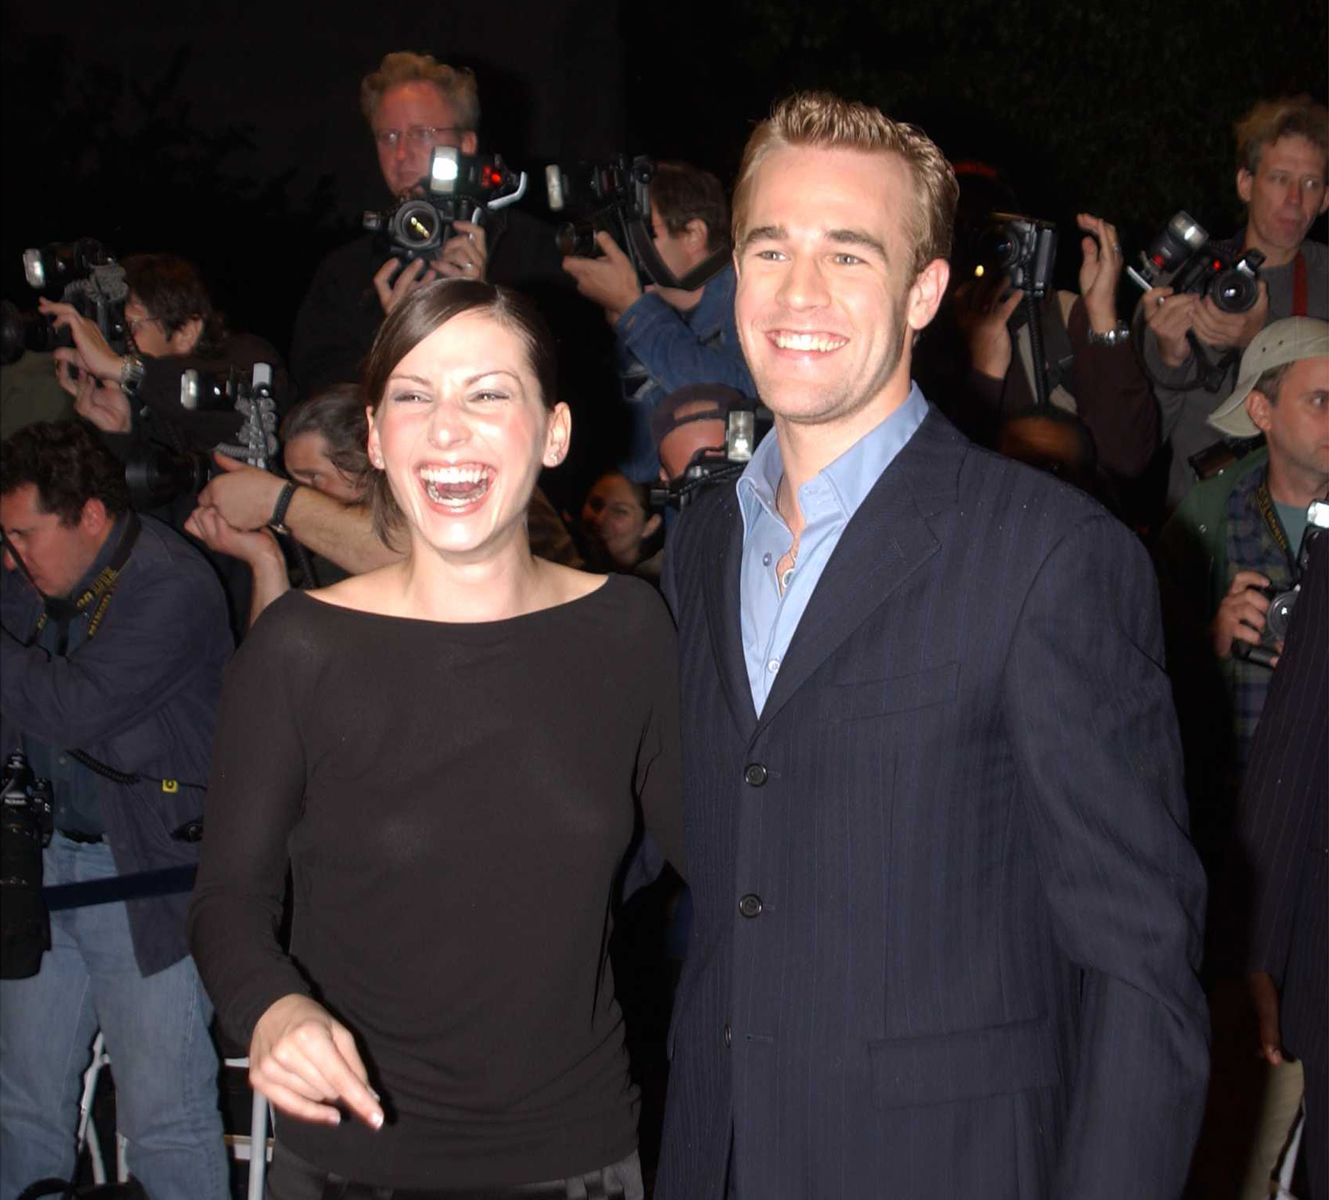 Heather McComb and James Van Der Beek at the screening of "The Rules of Attraction" on October 10, 2002, in New York City. | Source: Arnaldo Magnani/Getty Images